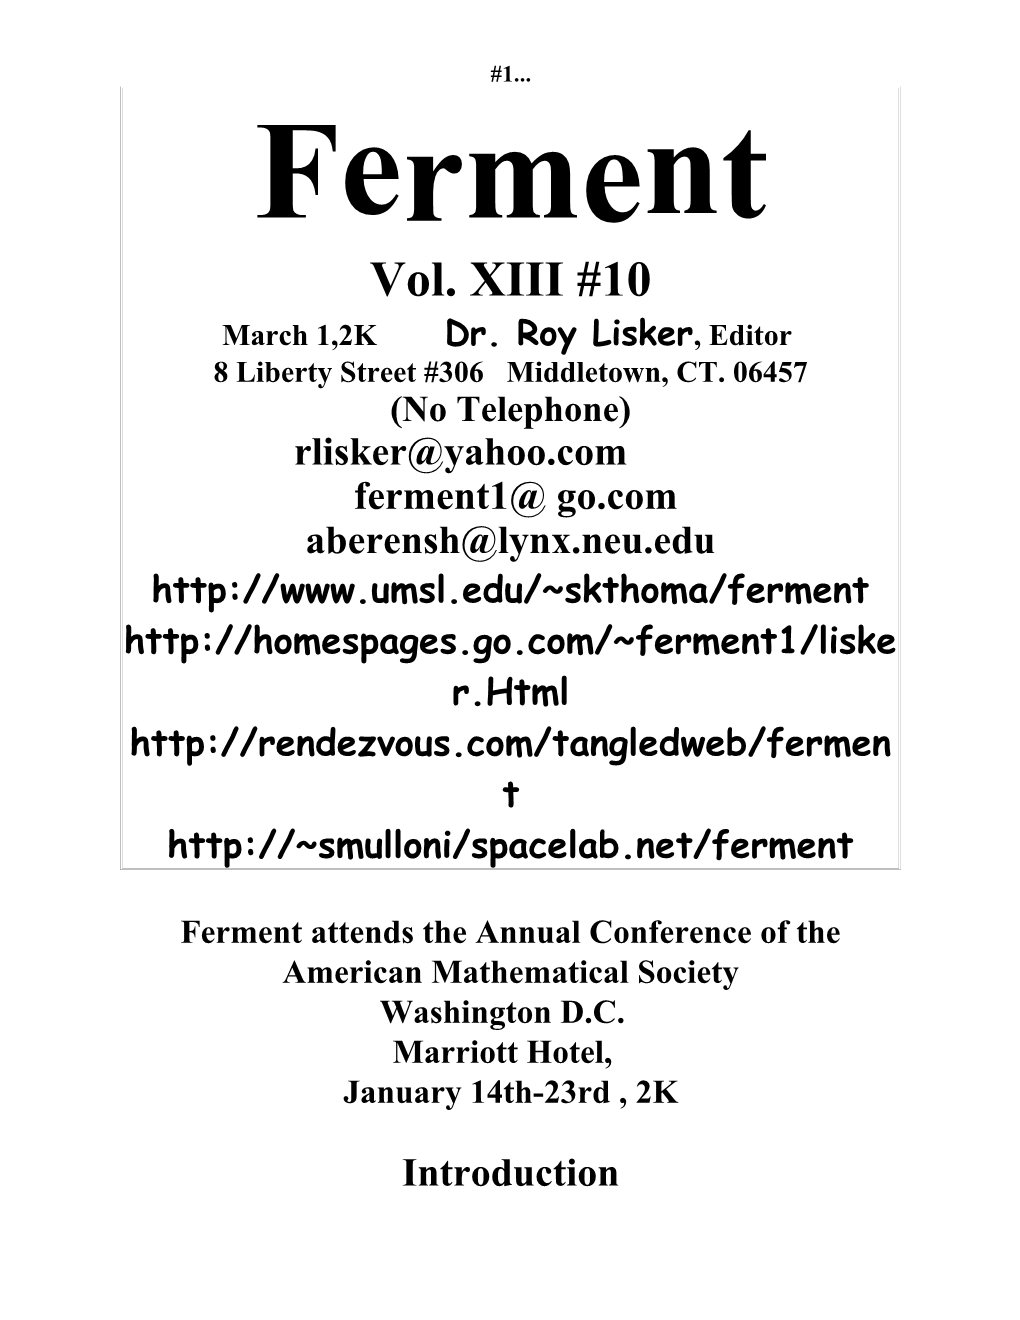 Ferment Attends the Annual Conference of the American Mathematical Society